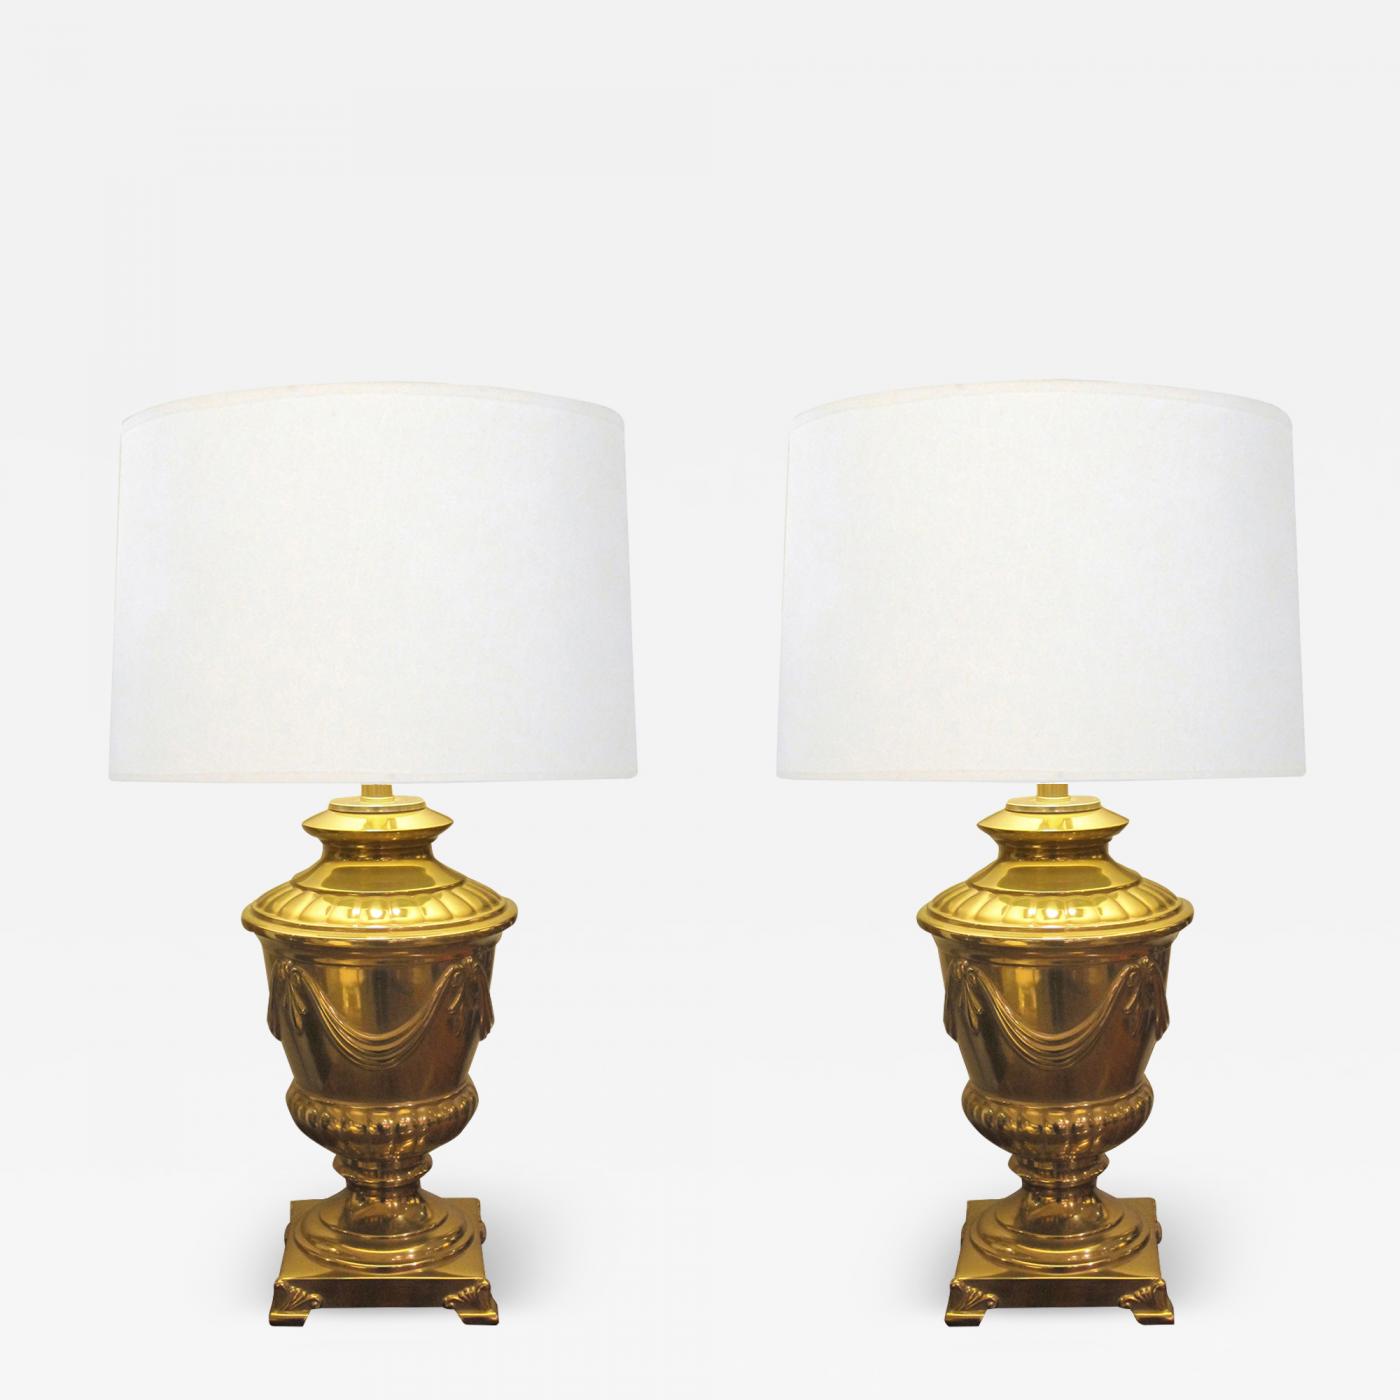 Frederick Cooper Lamp Co. - A Good Quality Pair of 1960's Frederick Cooper  Campagna-form Solid Brass Lamps